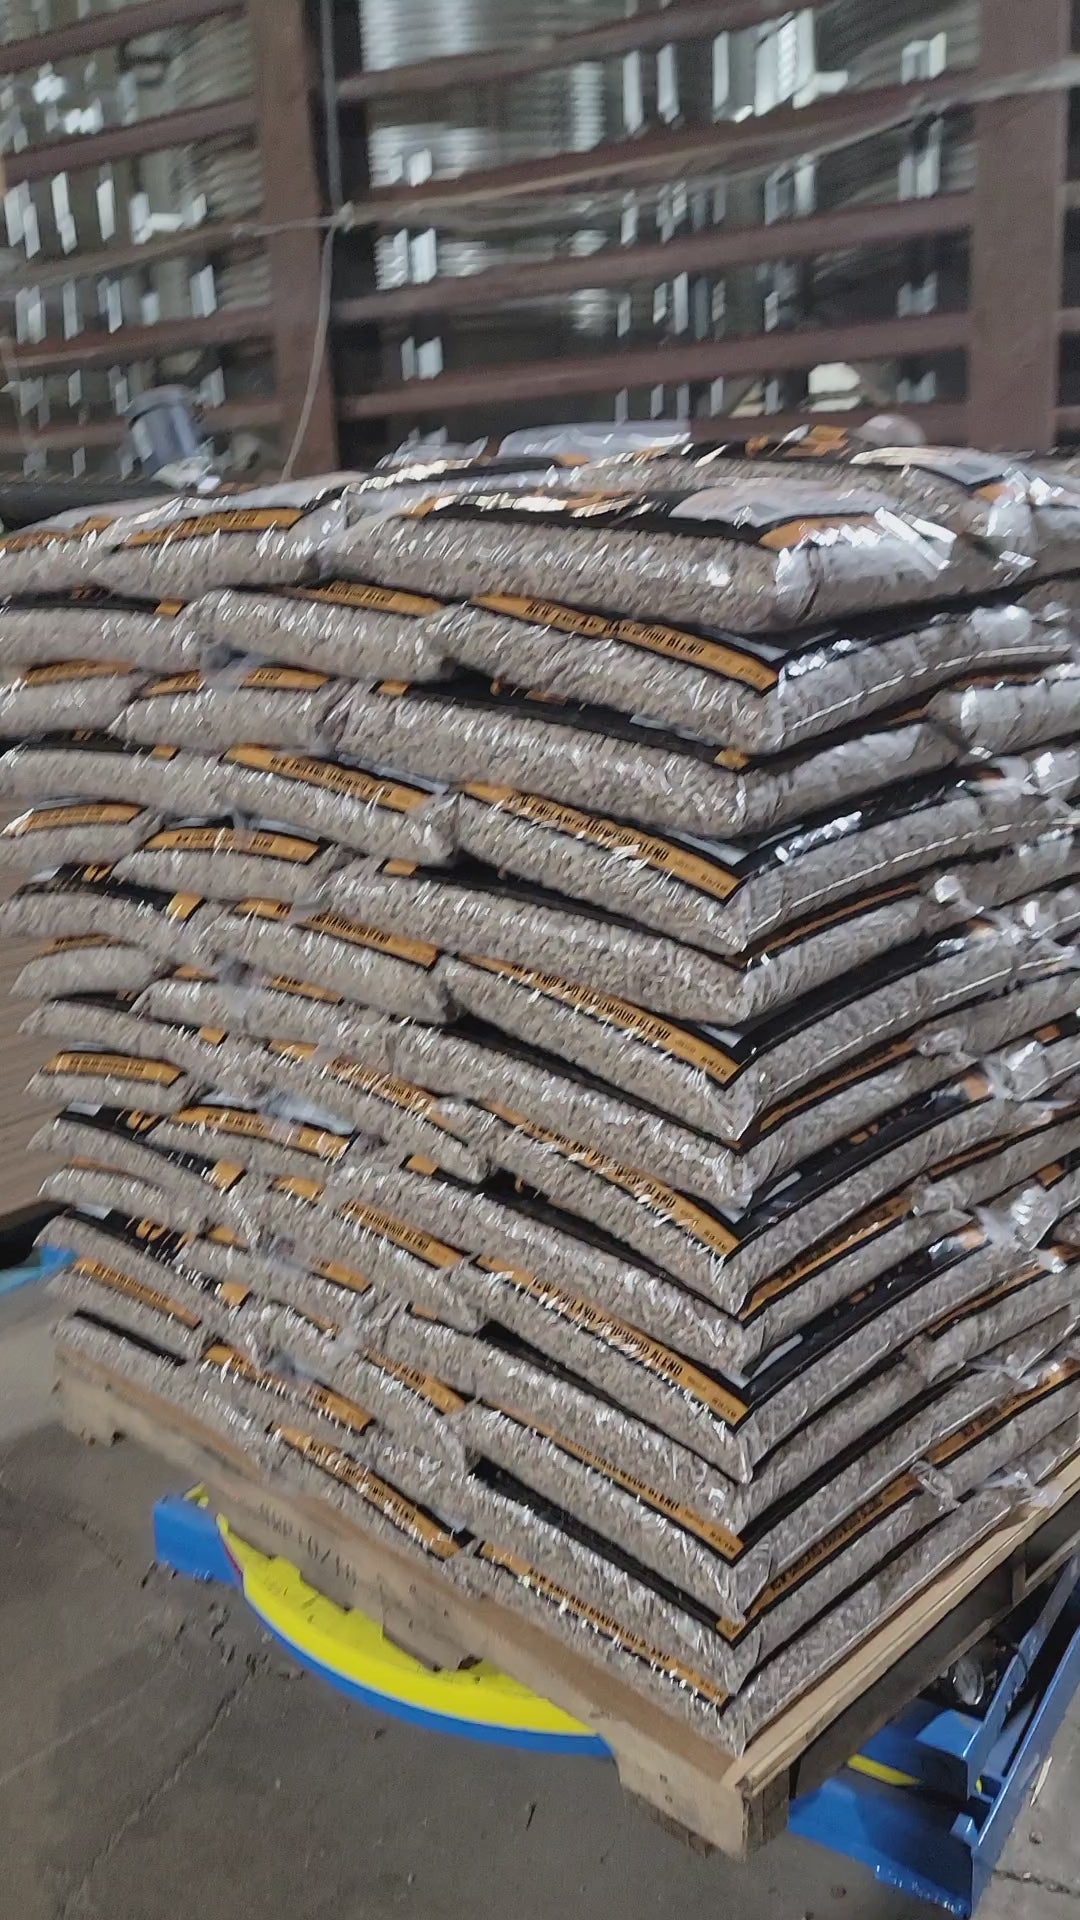 Another pallet of Manchester Heating Pellets being born. Made right here in Connecticut!